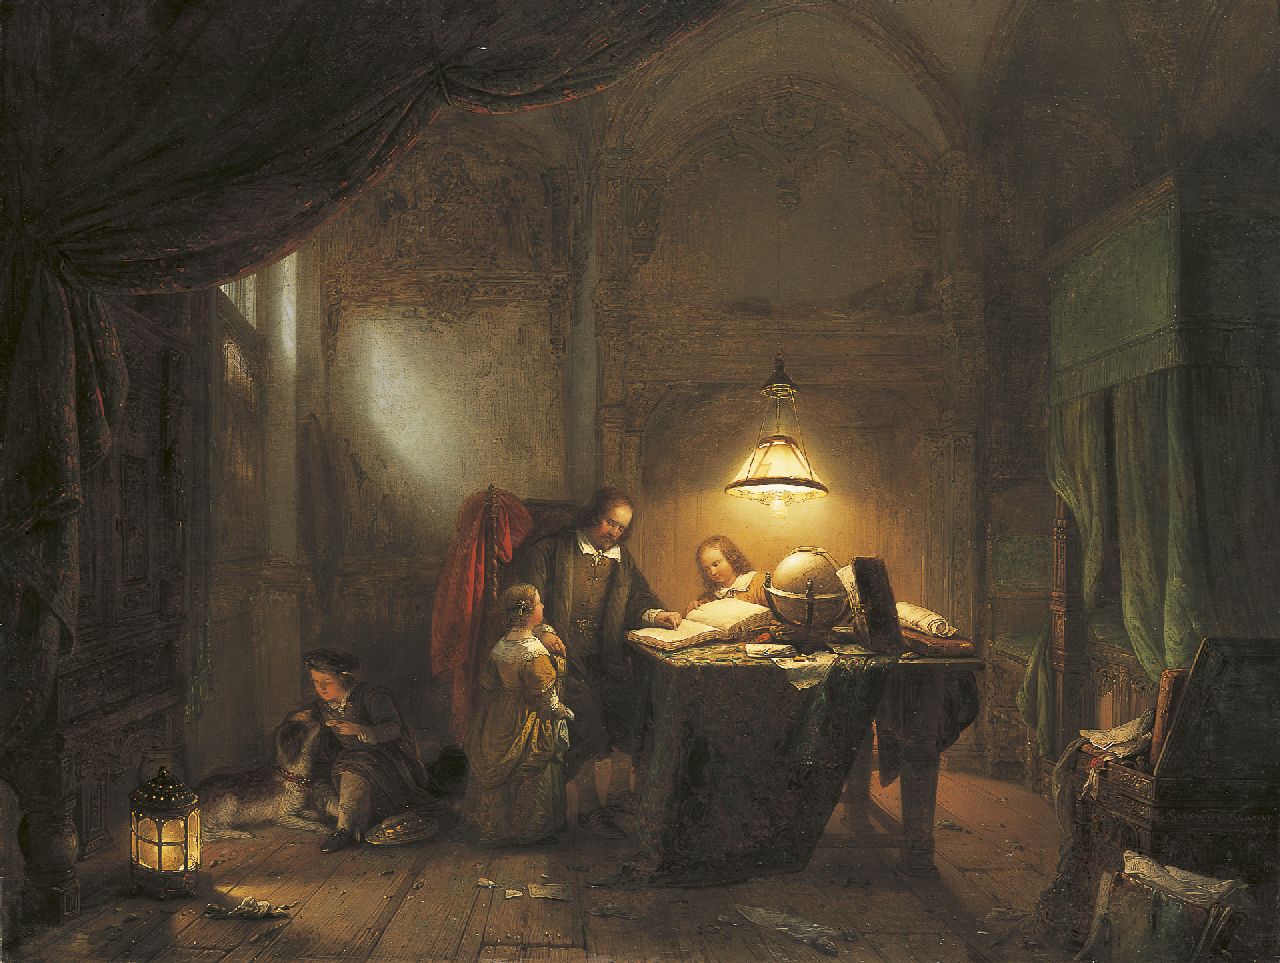 Haanen G.G.  | George Gillis Haanen, The Lesson, oil on canvas 60.3 x 92.0 cm, signed l.r. and dated 1853